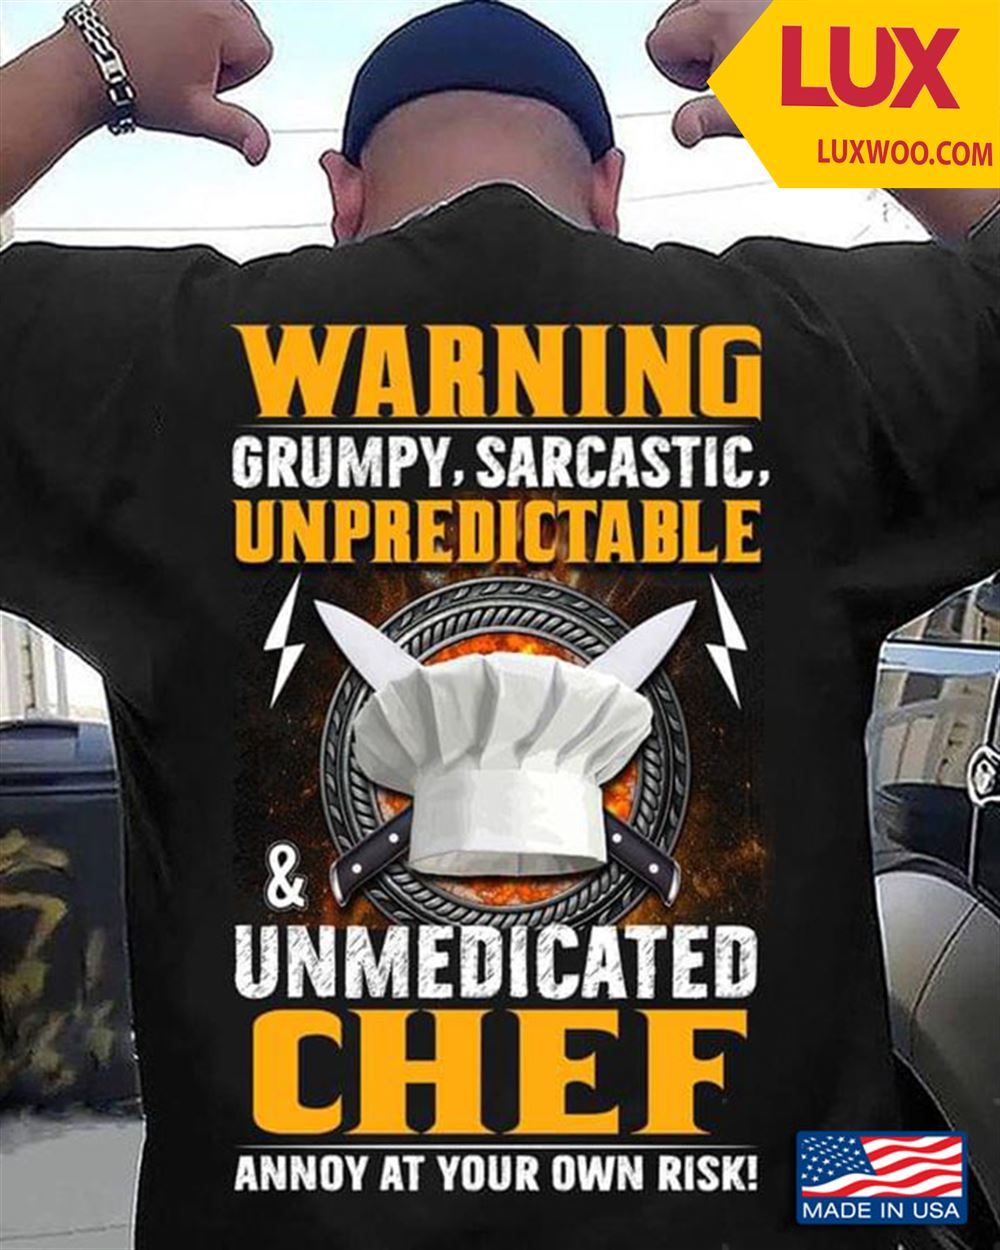 Warning Grumpy Sarcastic Unpredictable Unmedicated Chef Annoy At Your Own Risk Tshirt Size Up To 5xl